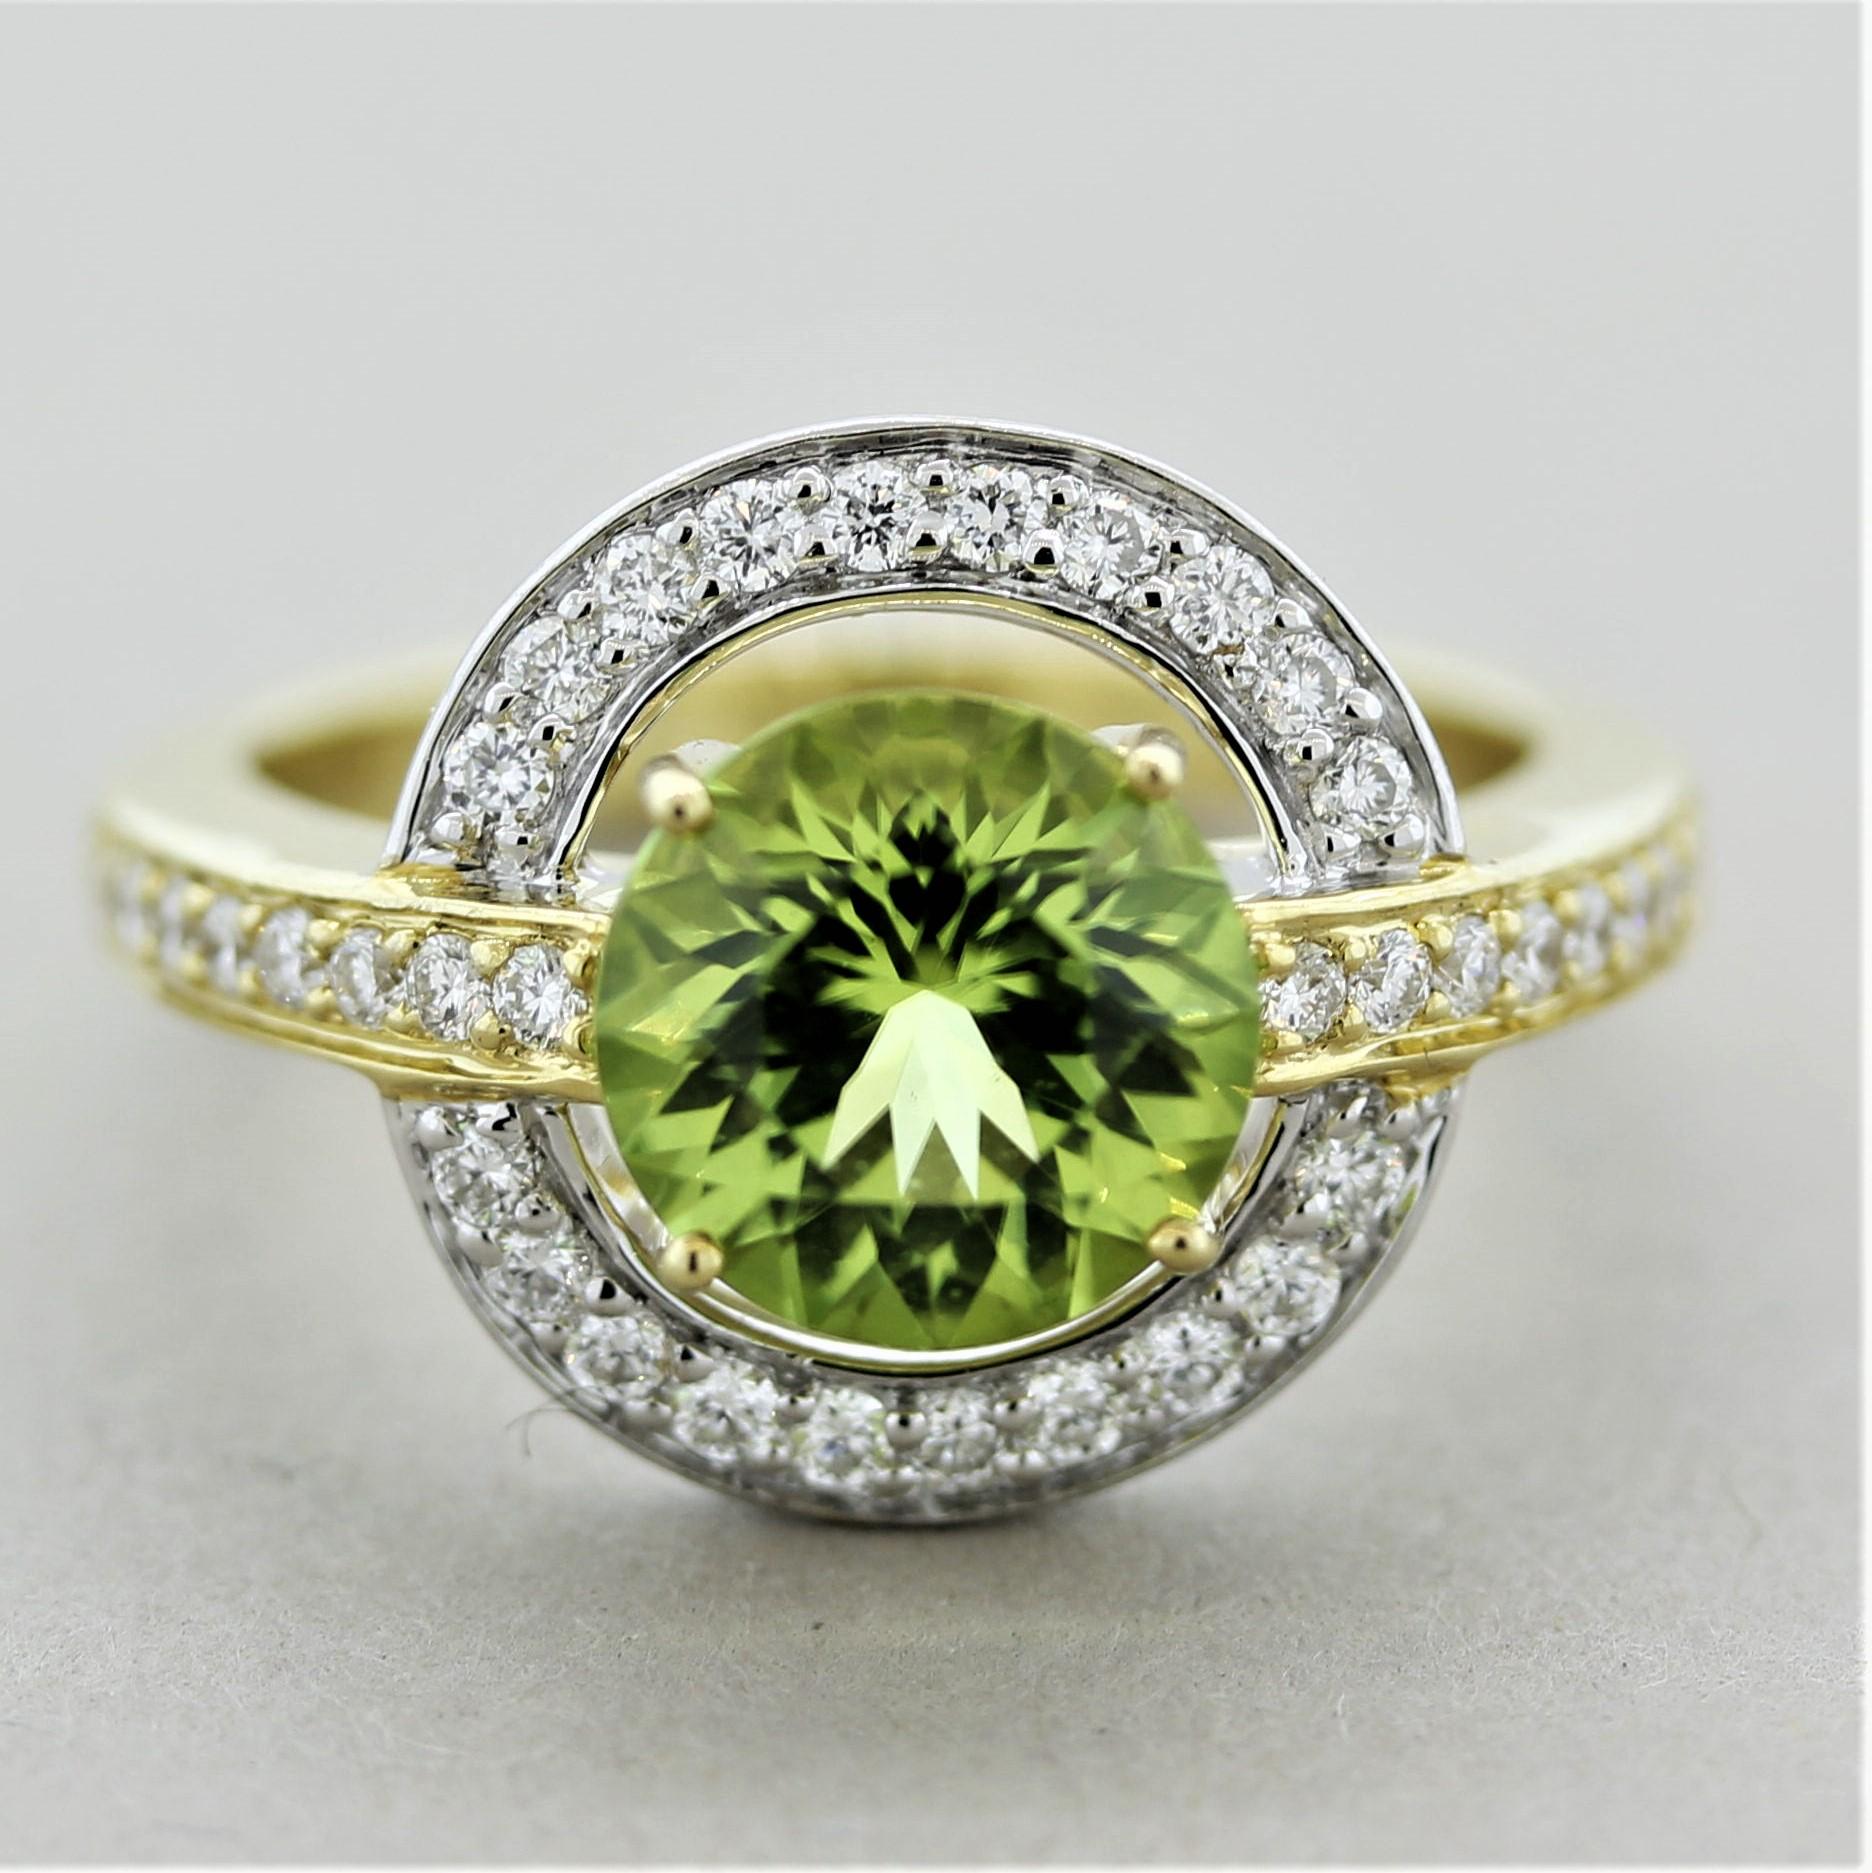 A chic and fashionable diamond gemstone ring! It features a bright and vibrant peridot weighing 2.31 carats which is accented by 0.41 carats of round brilliant-cut diamonds adding brilliance and sparkle to the piece. Made in both 18k white and